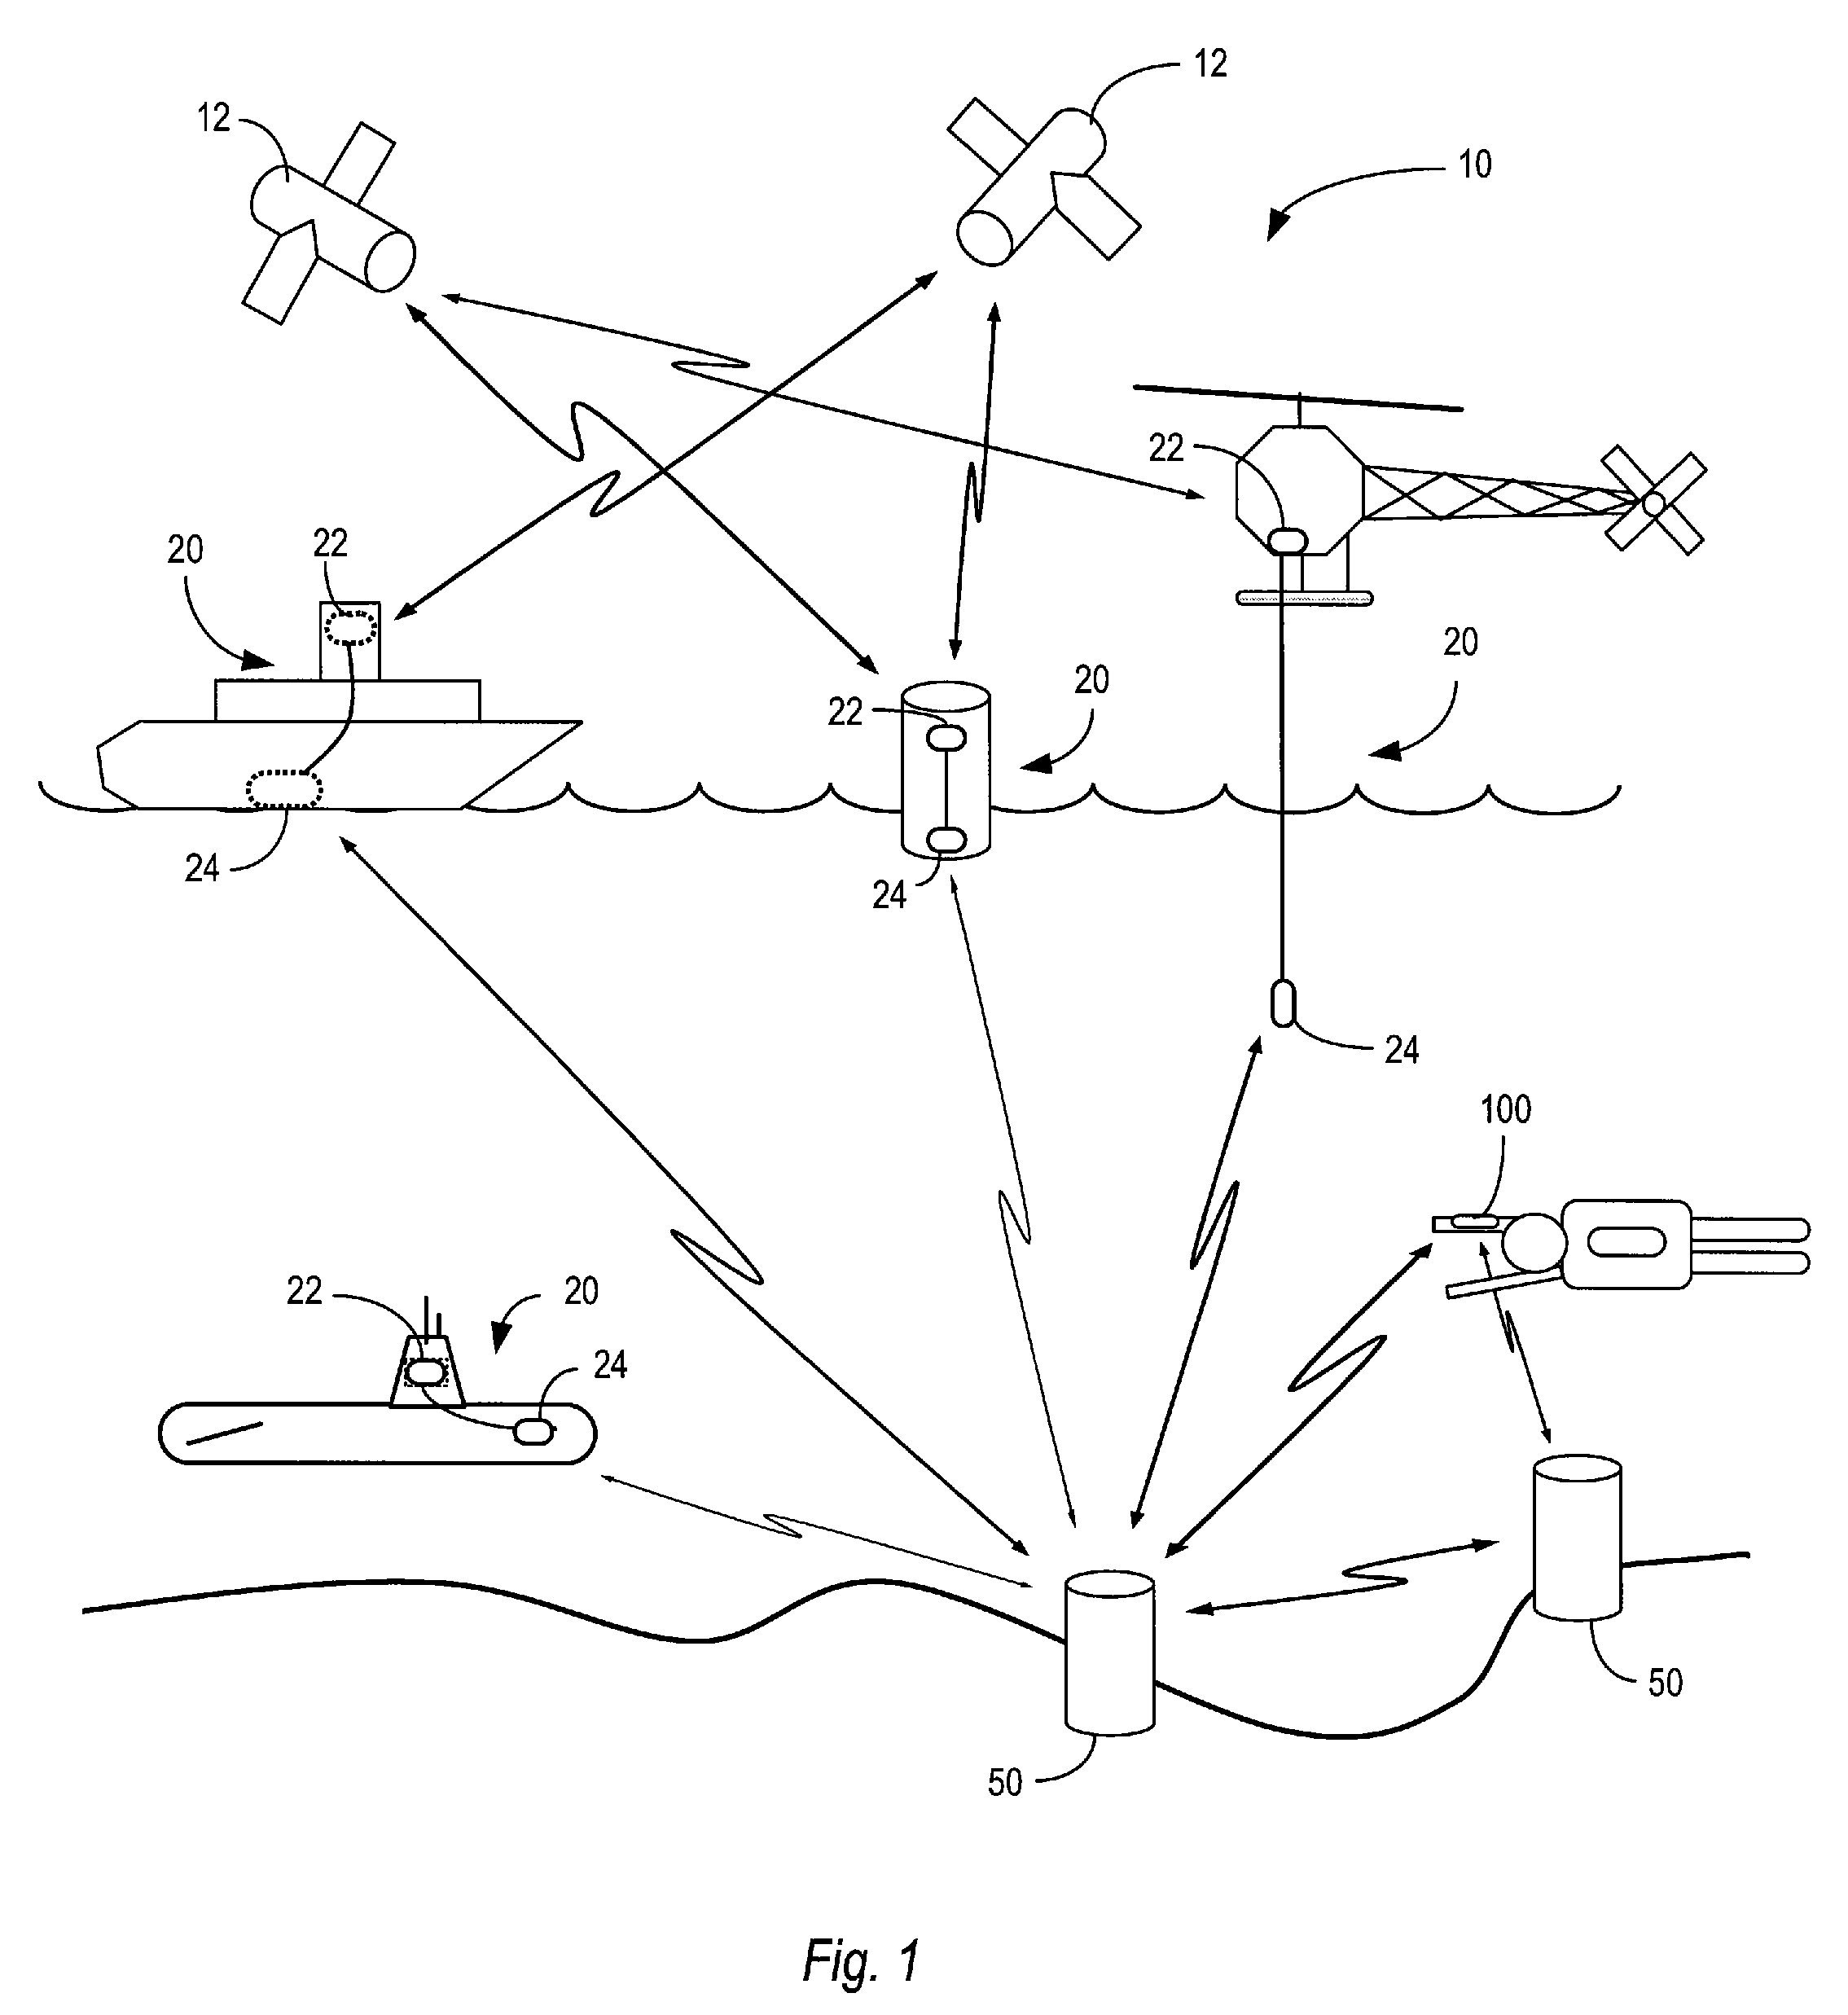 System and Method for Extending GPS to Divers and Underwater Vehicles